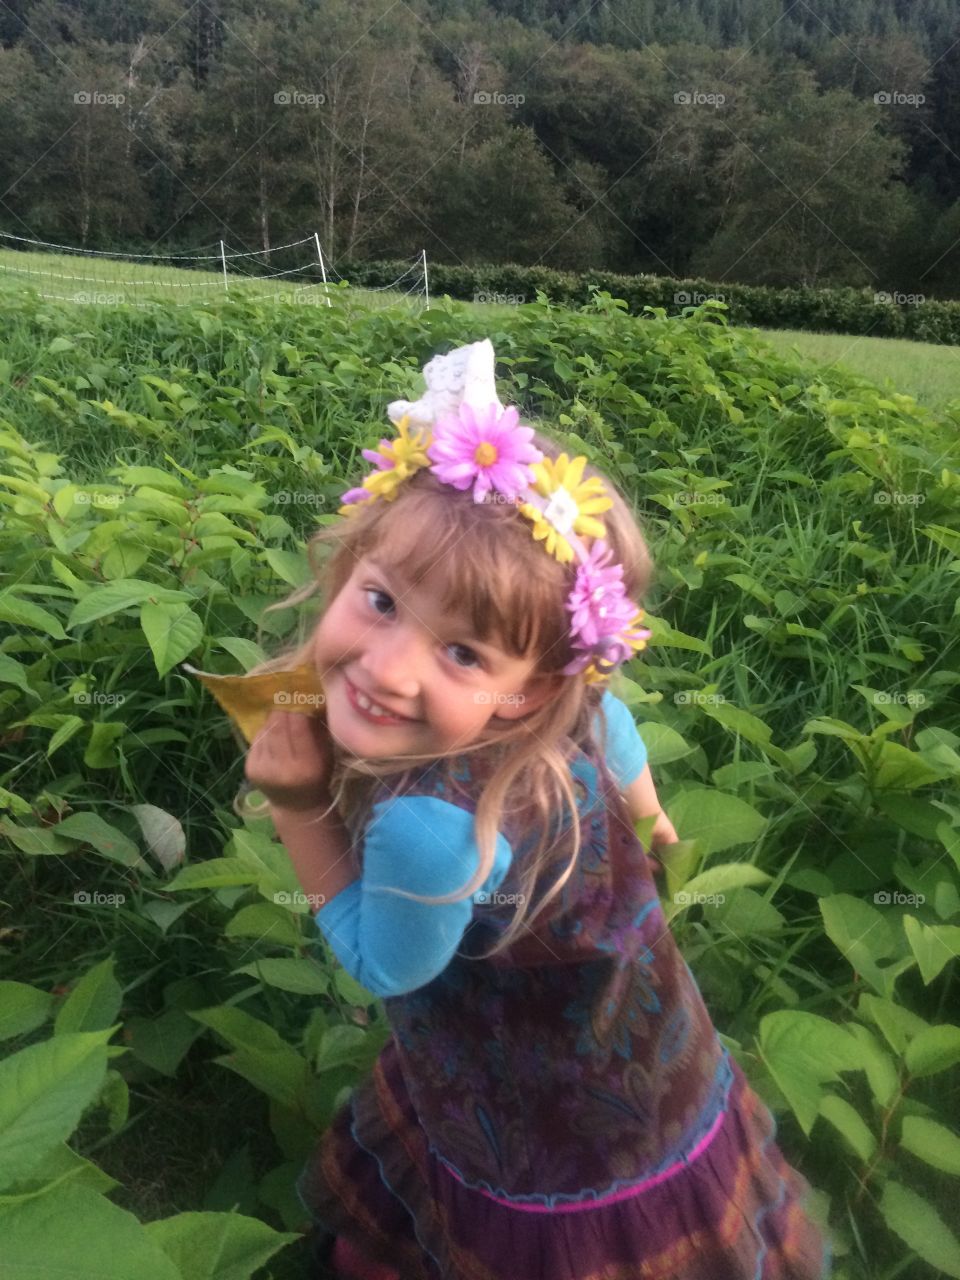 Flower crown. Girl with flower crown